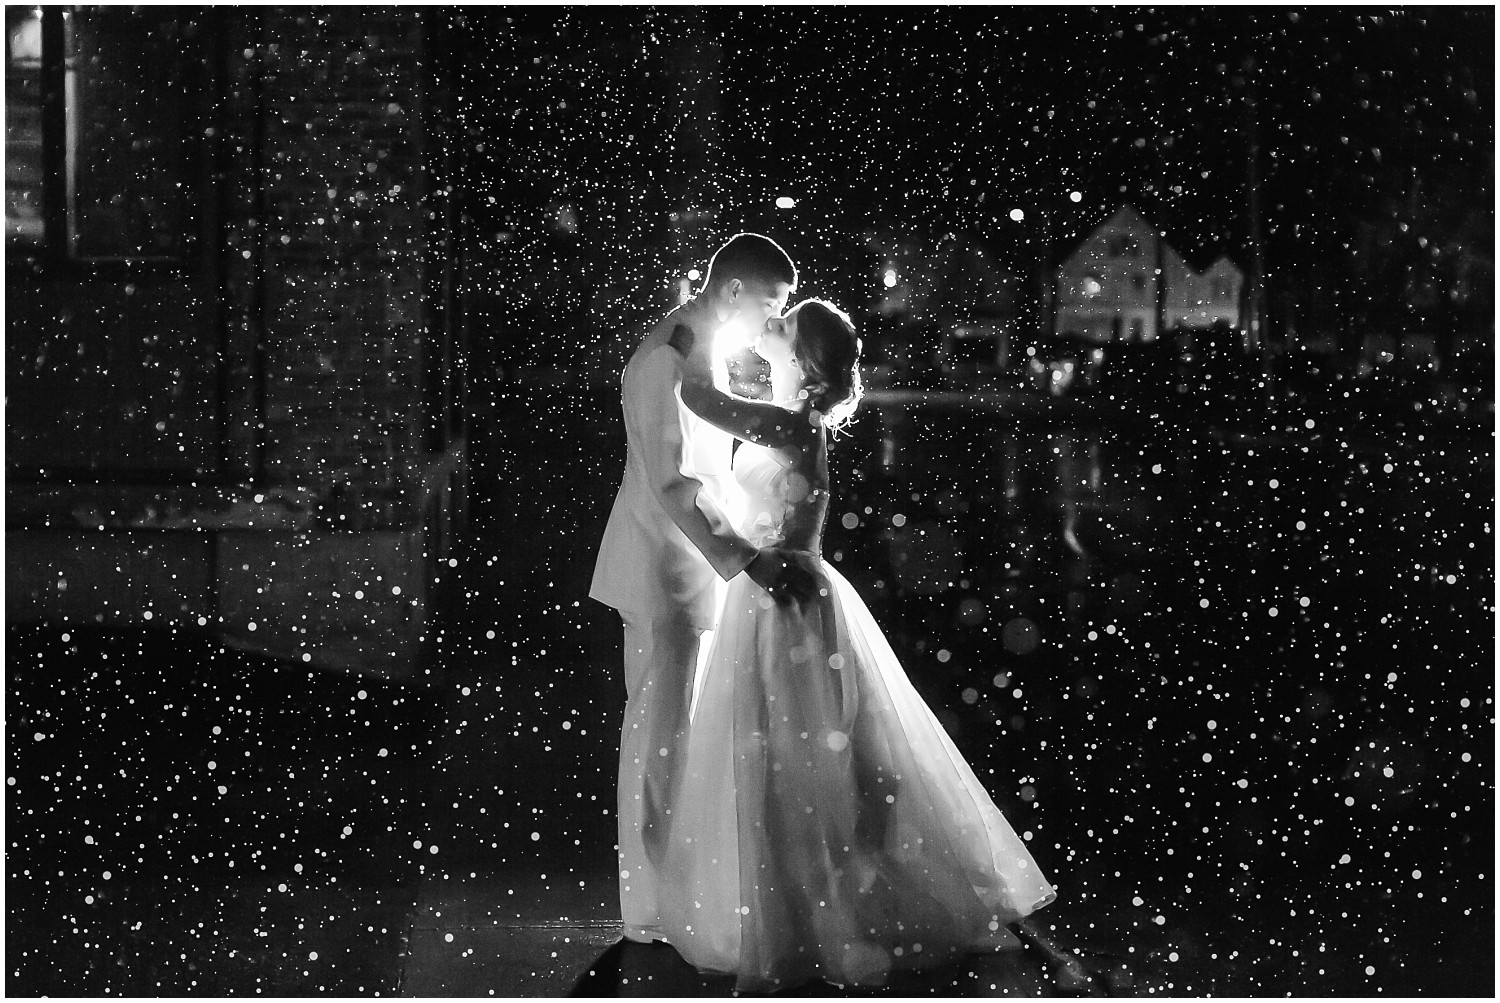 The Case of the Rainy Day Wedding | For Brides